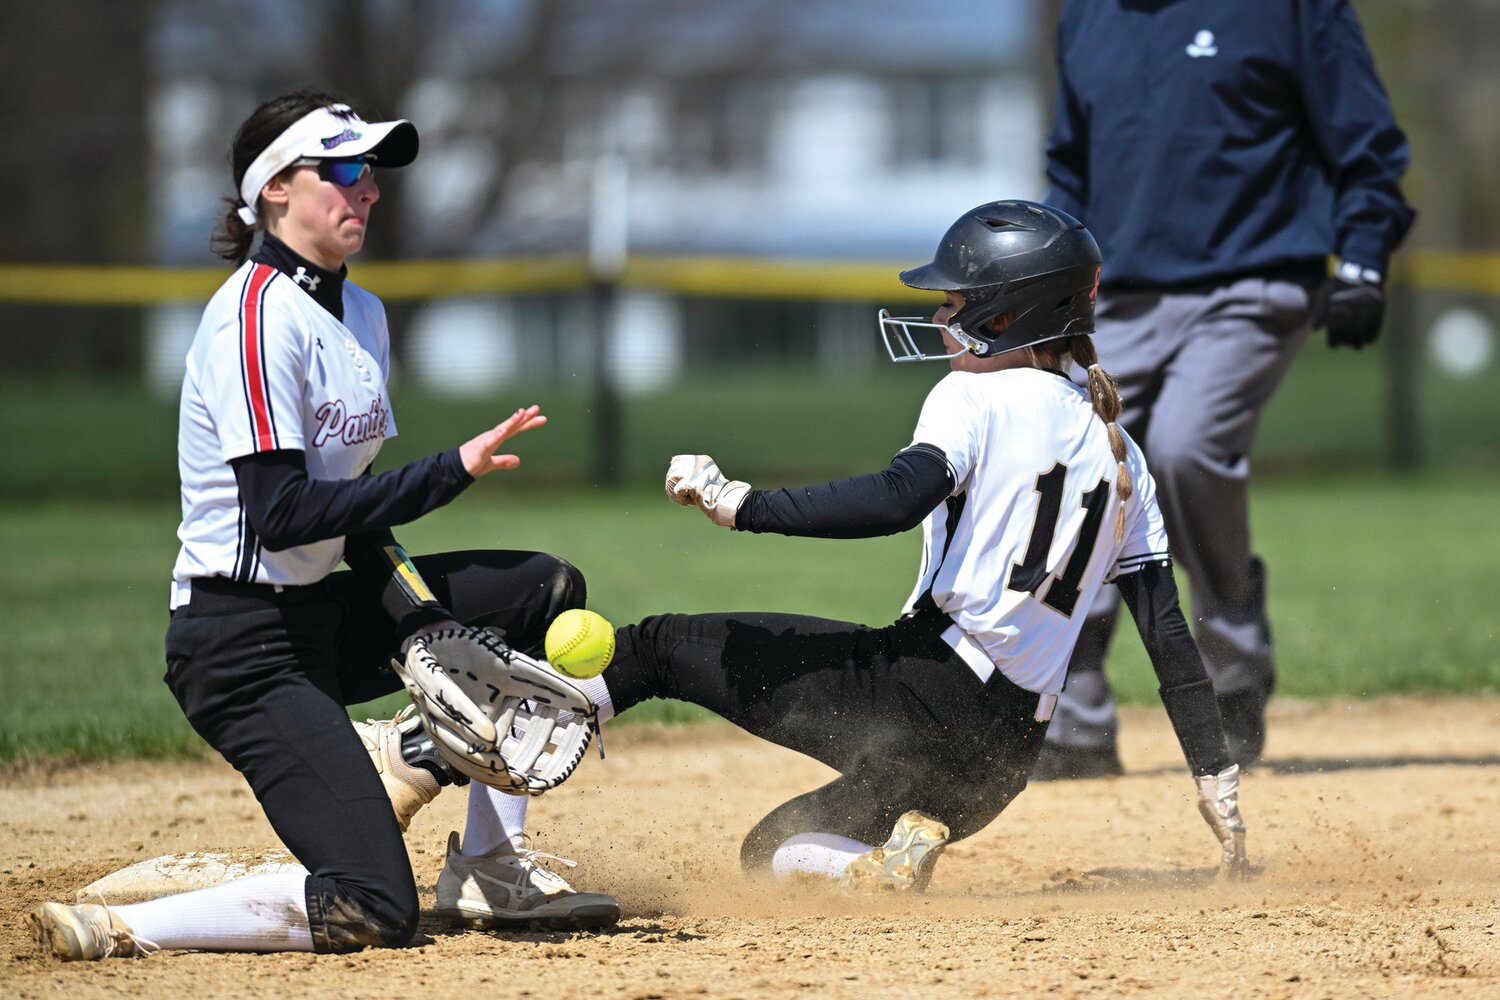 Archbishop Wood’s Parker Kraus beats the throw, stealing second base in the top of seventh inning as William Tennent shortstop Sydney Teufel fields the ball.